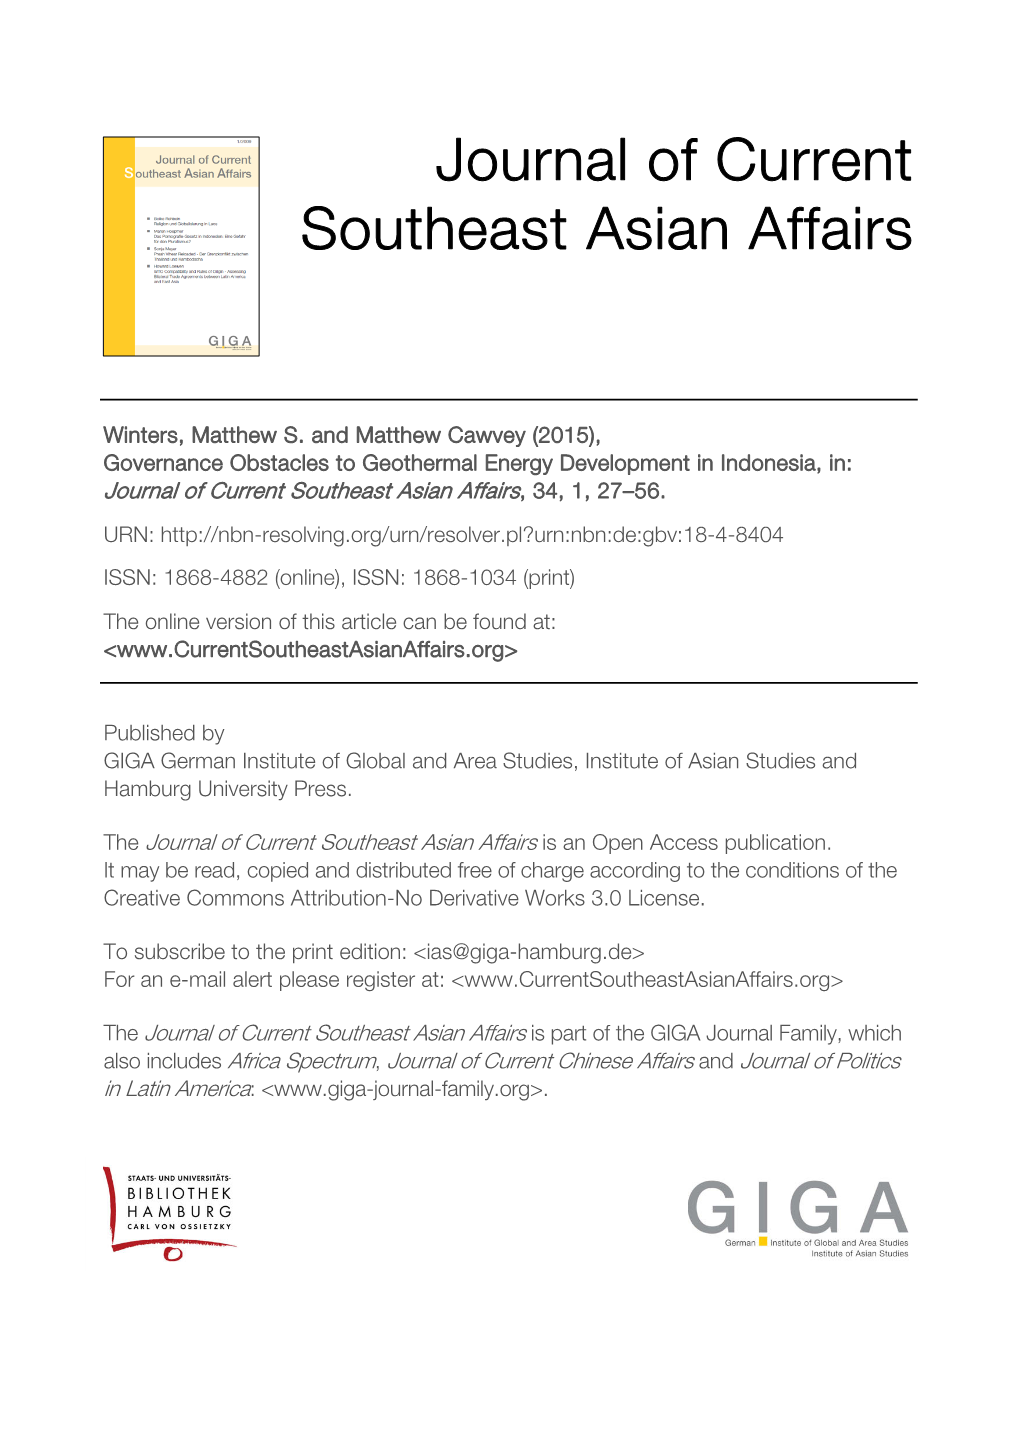 Governance Obstacles to Geothermal Energy Development in Indonesia, In: Journal of Current Southeast Asian Affairs, 34, 1, 27–56